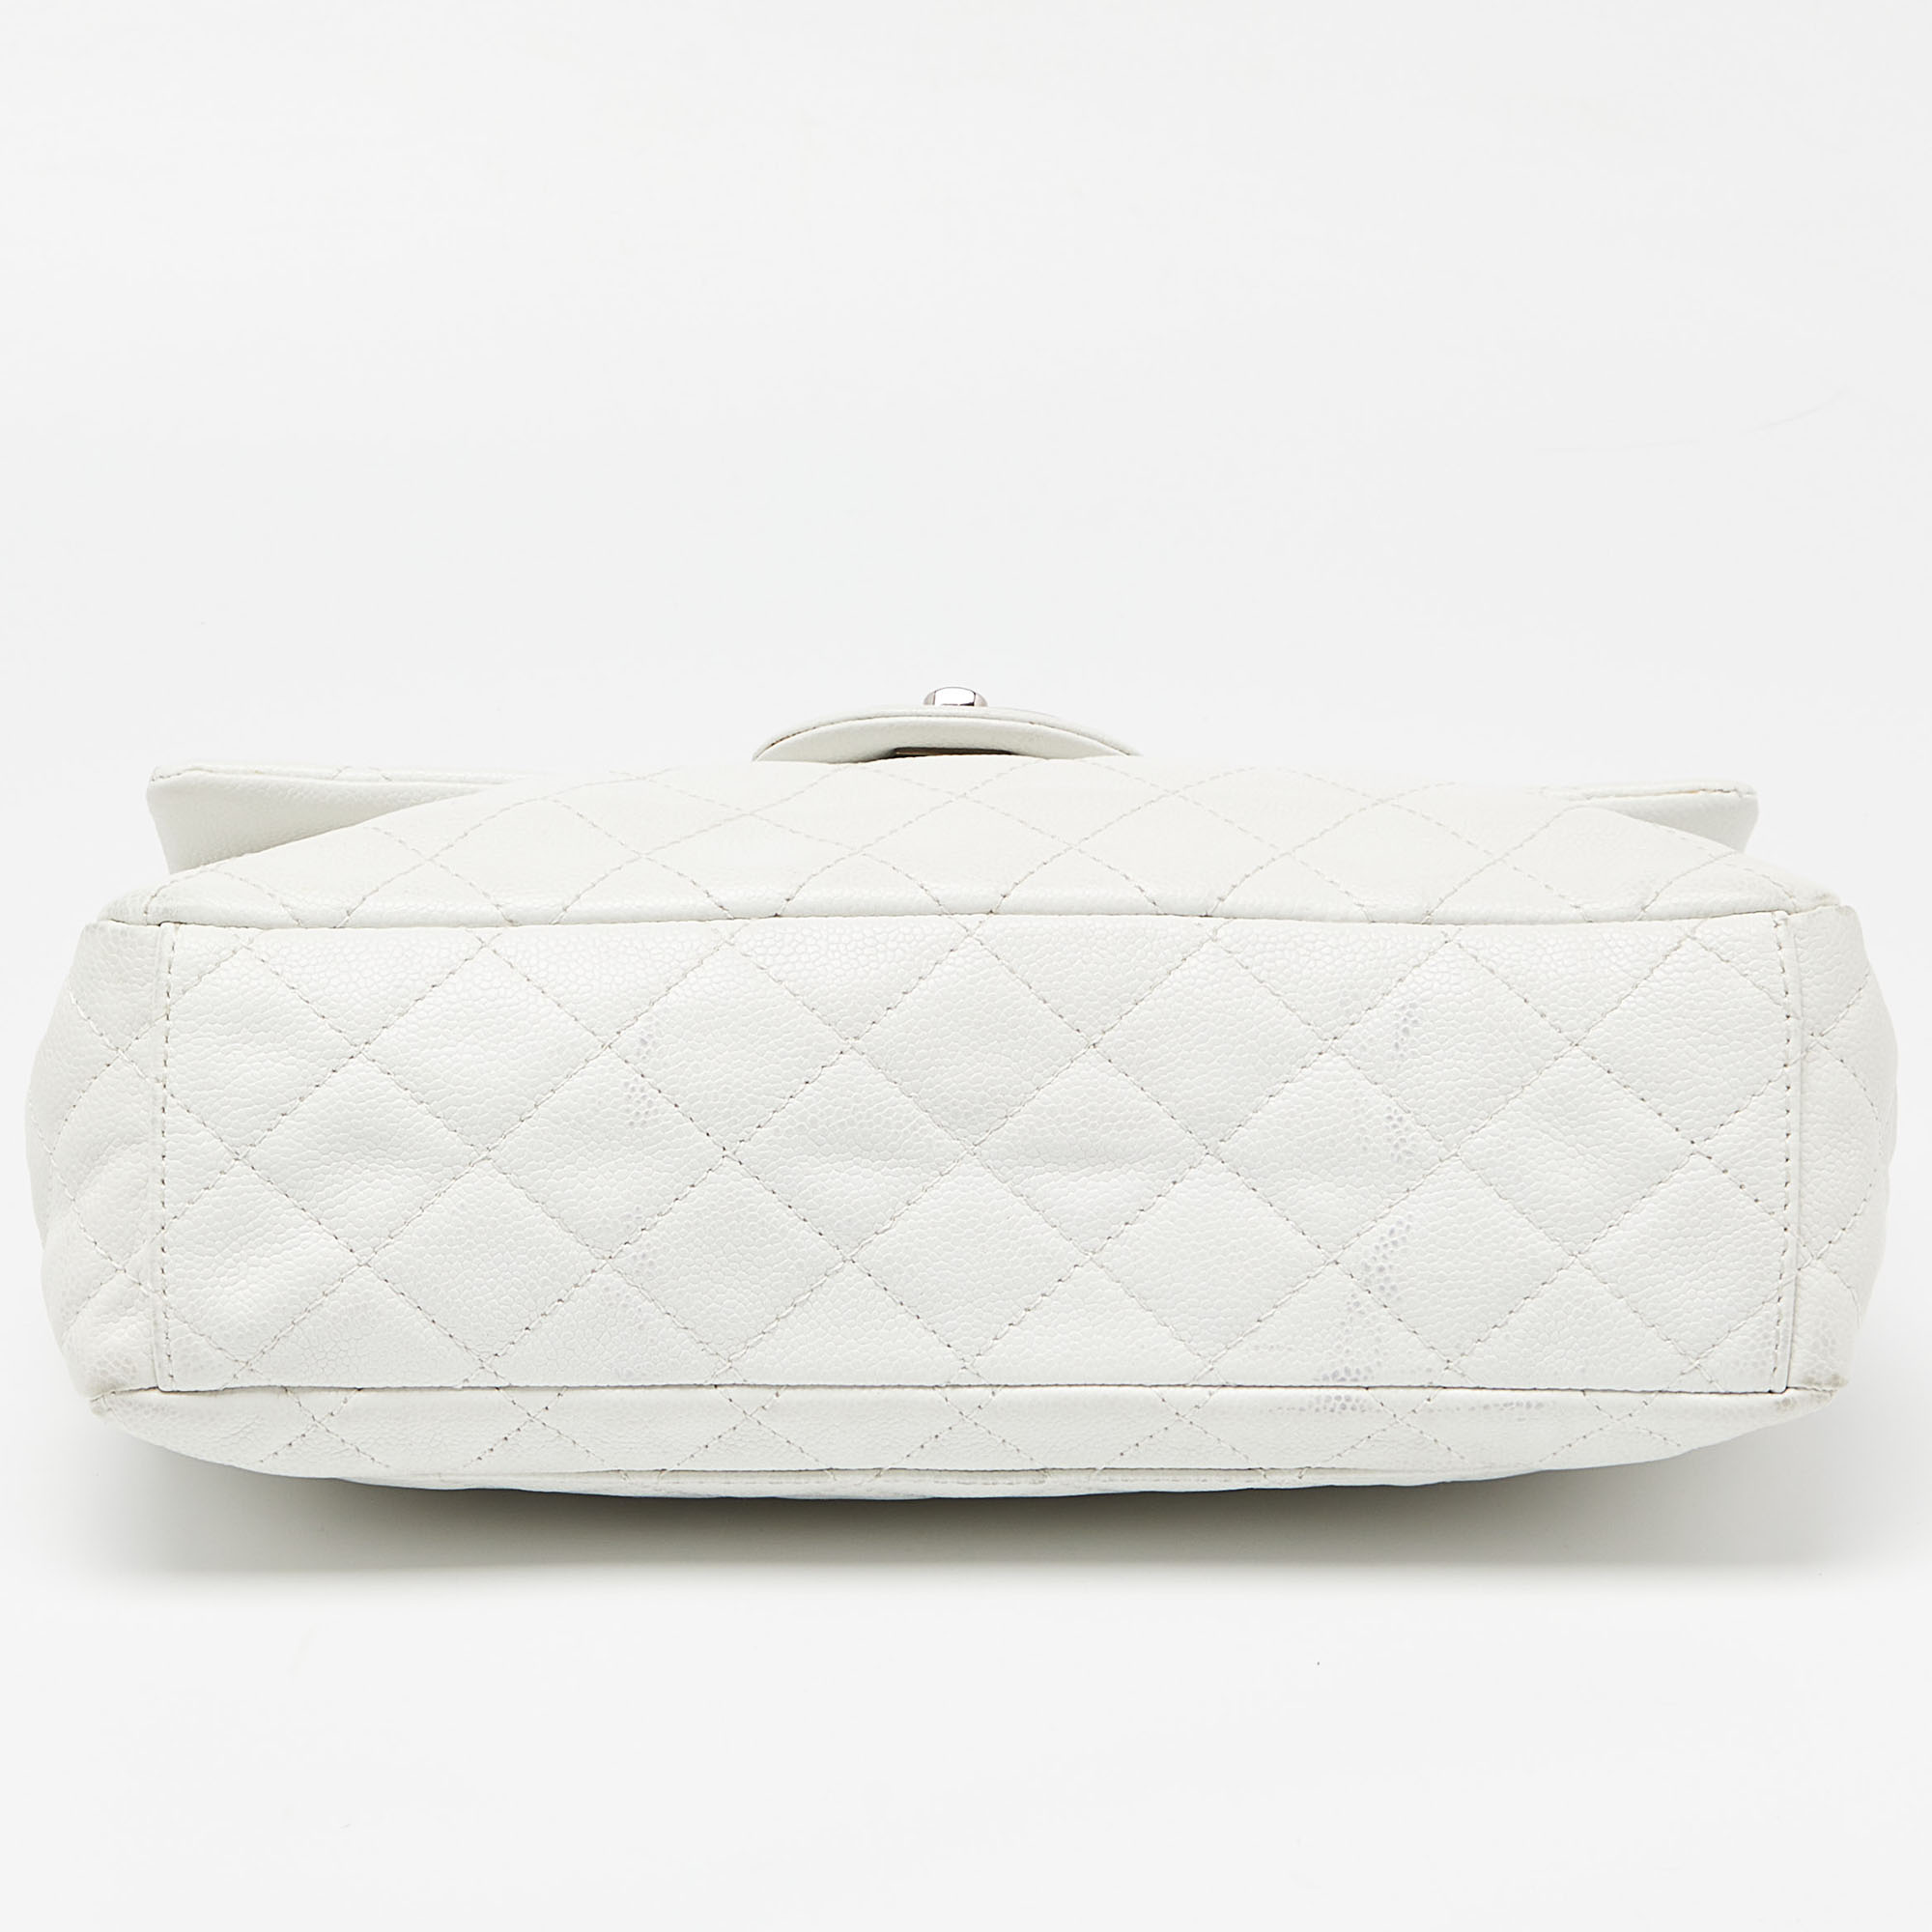 Chanel White Quilted Caviar Leather Maxi Vintage Classic Single Flap Bag